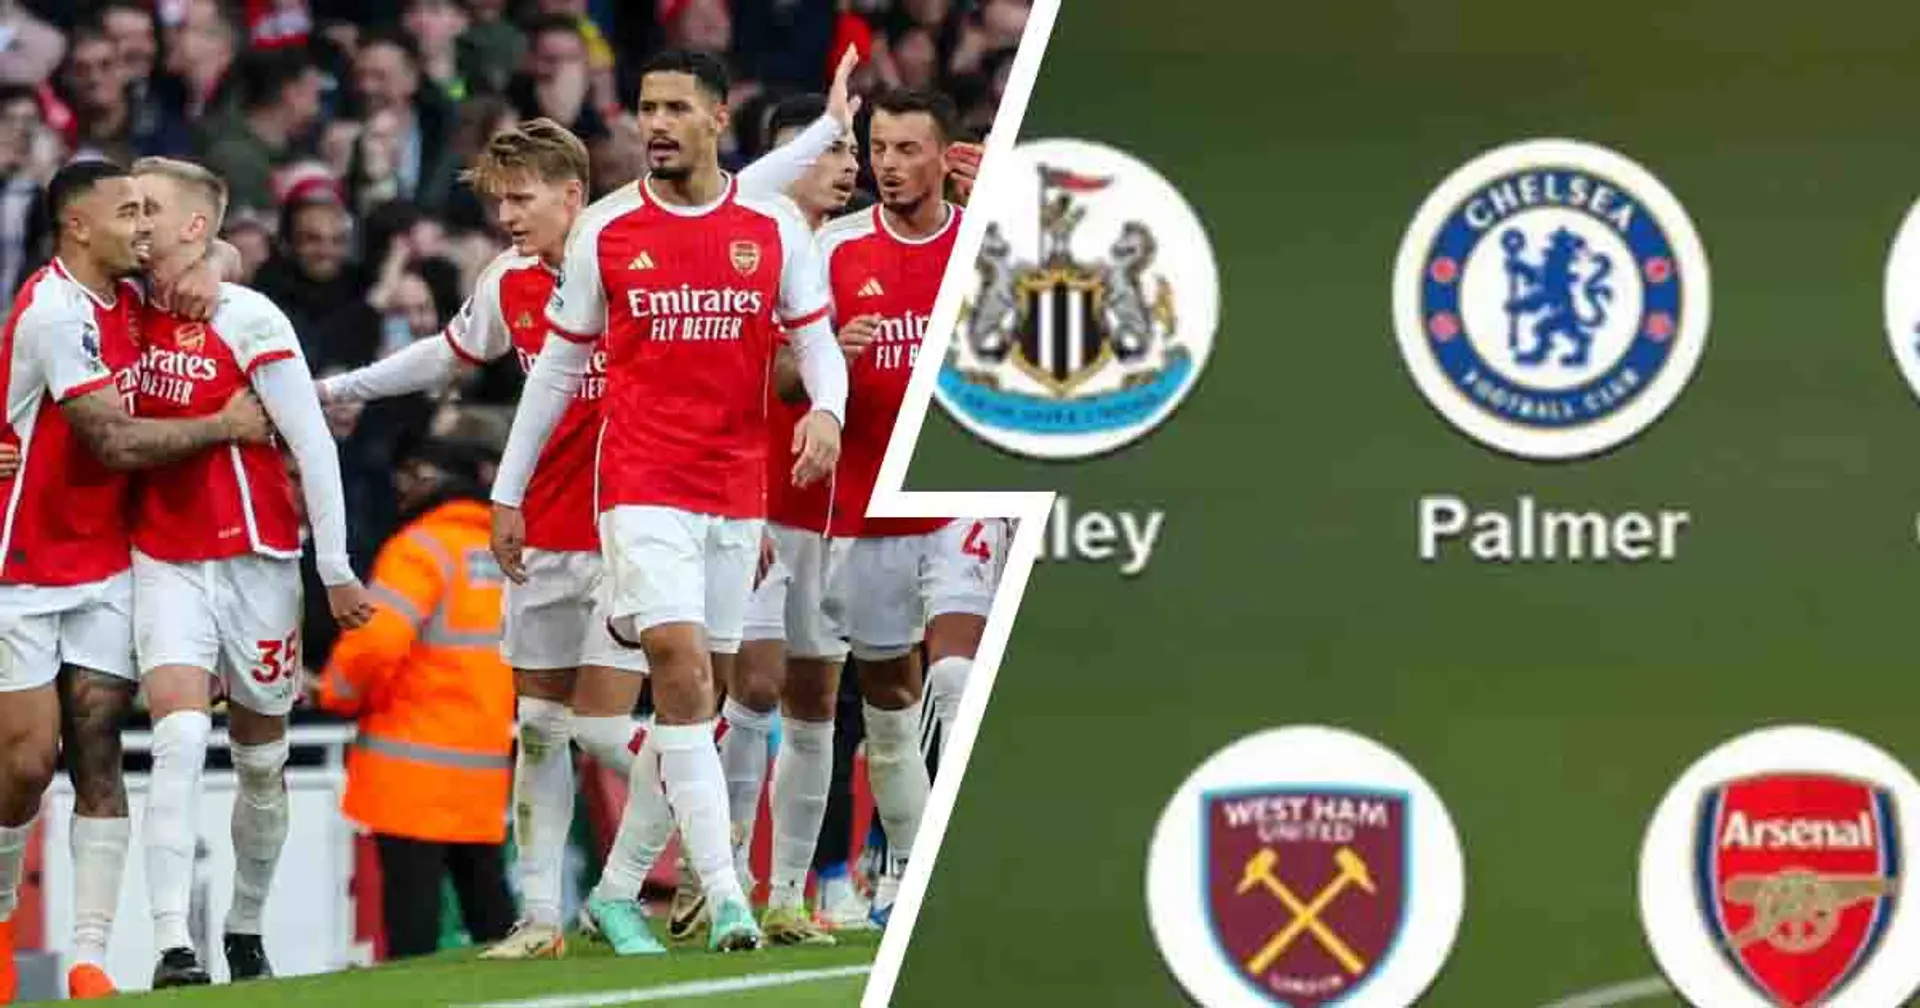 Only one Arsenal player named in BBC's Premier League Team of the Week after Brighton heroics